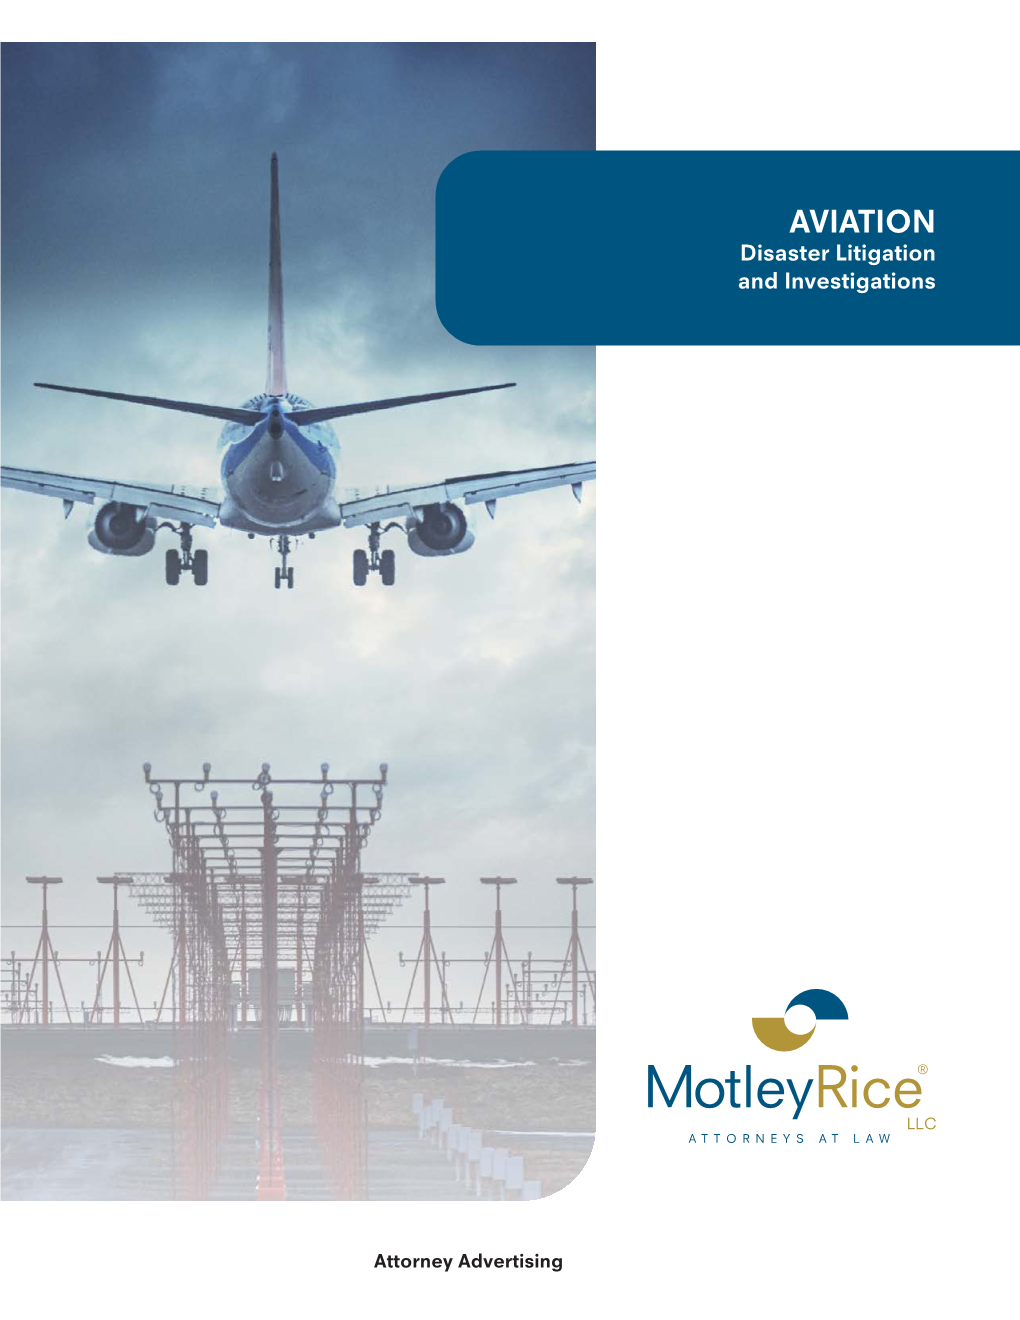 AVIATION Disaster Litigation and Investigations